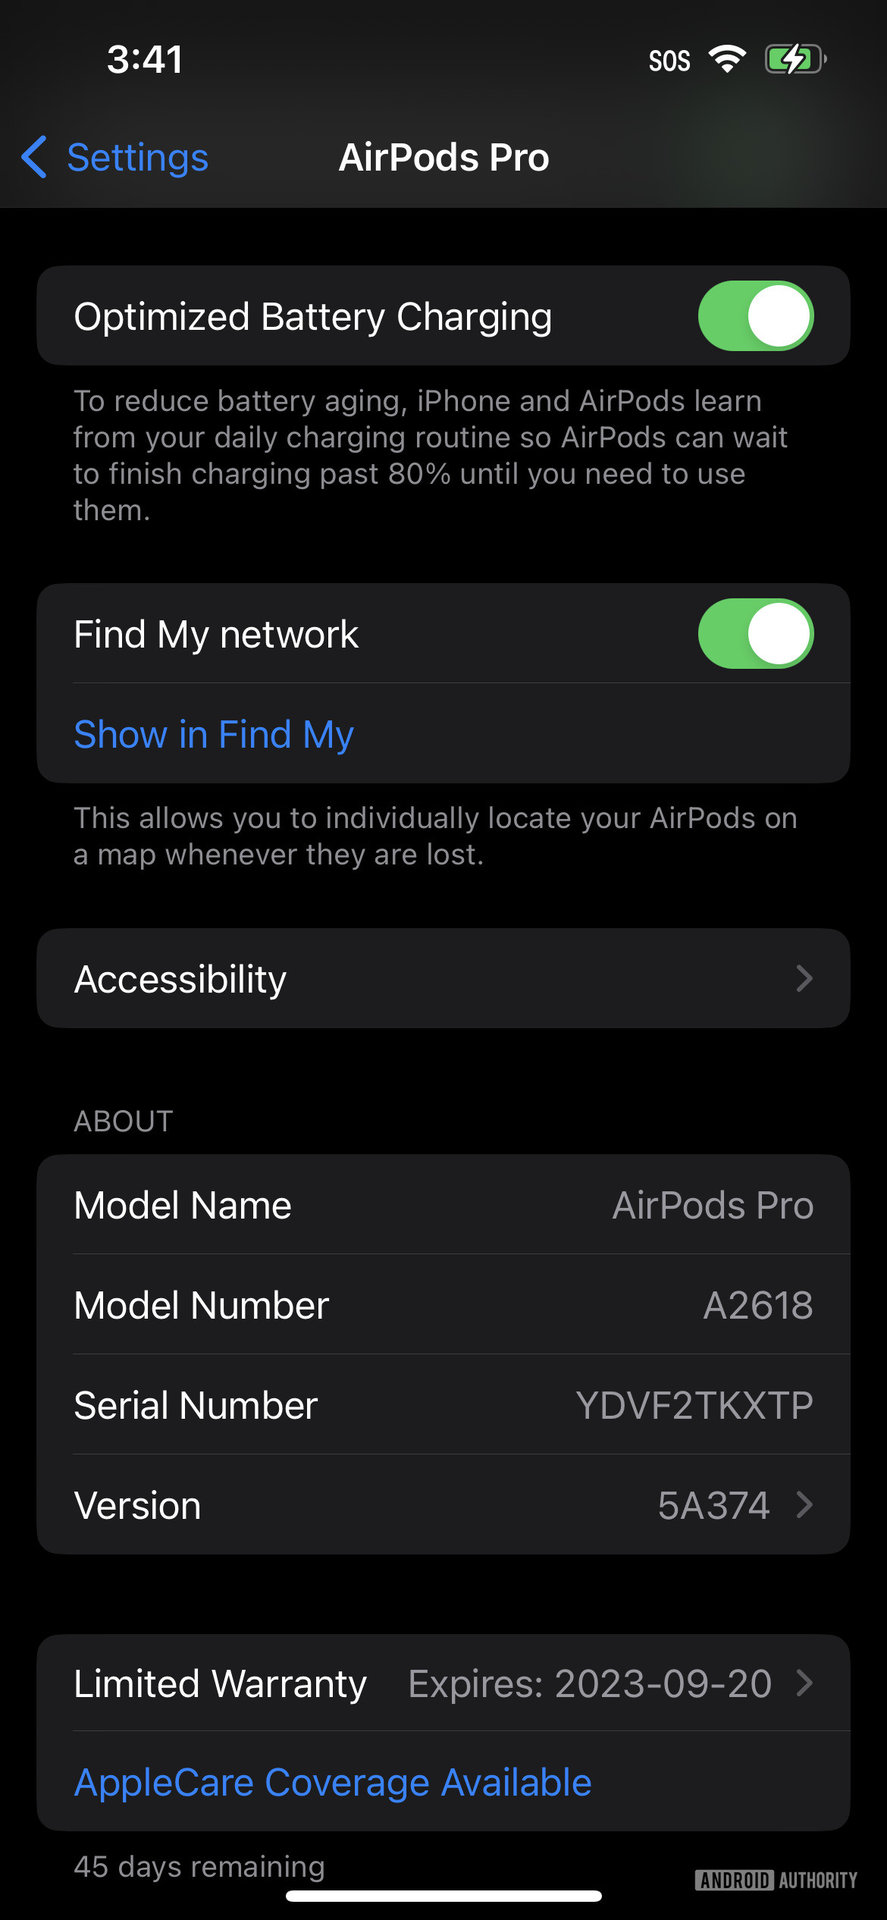 A screenshot of the AirPods Pro 2 settings page in the iPhone Settings app showing the bottom portion.